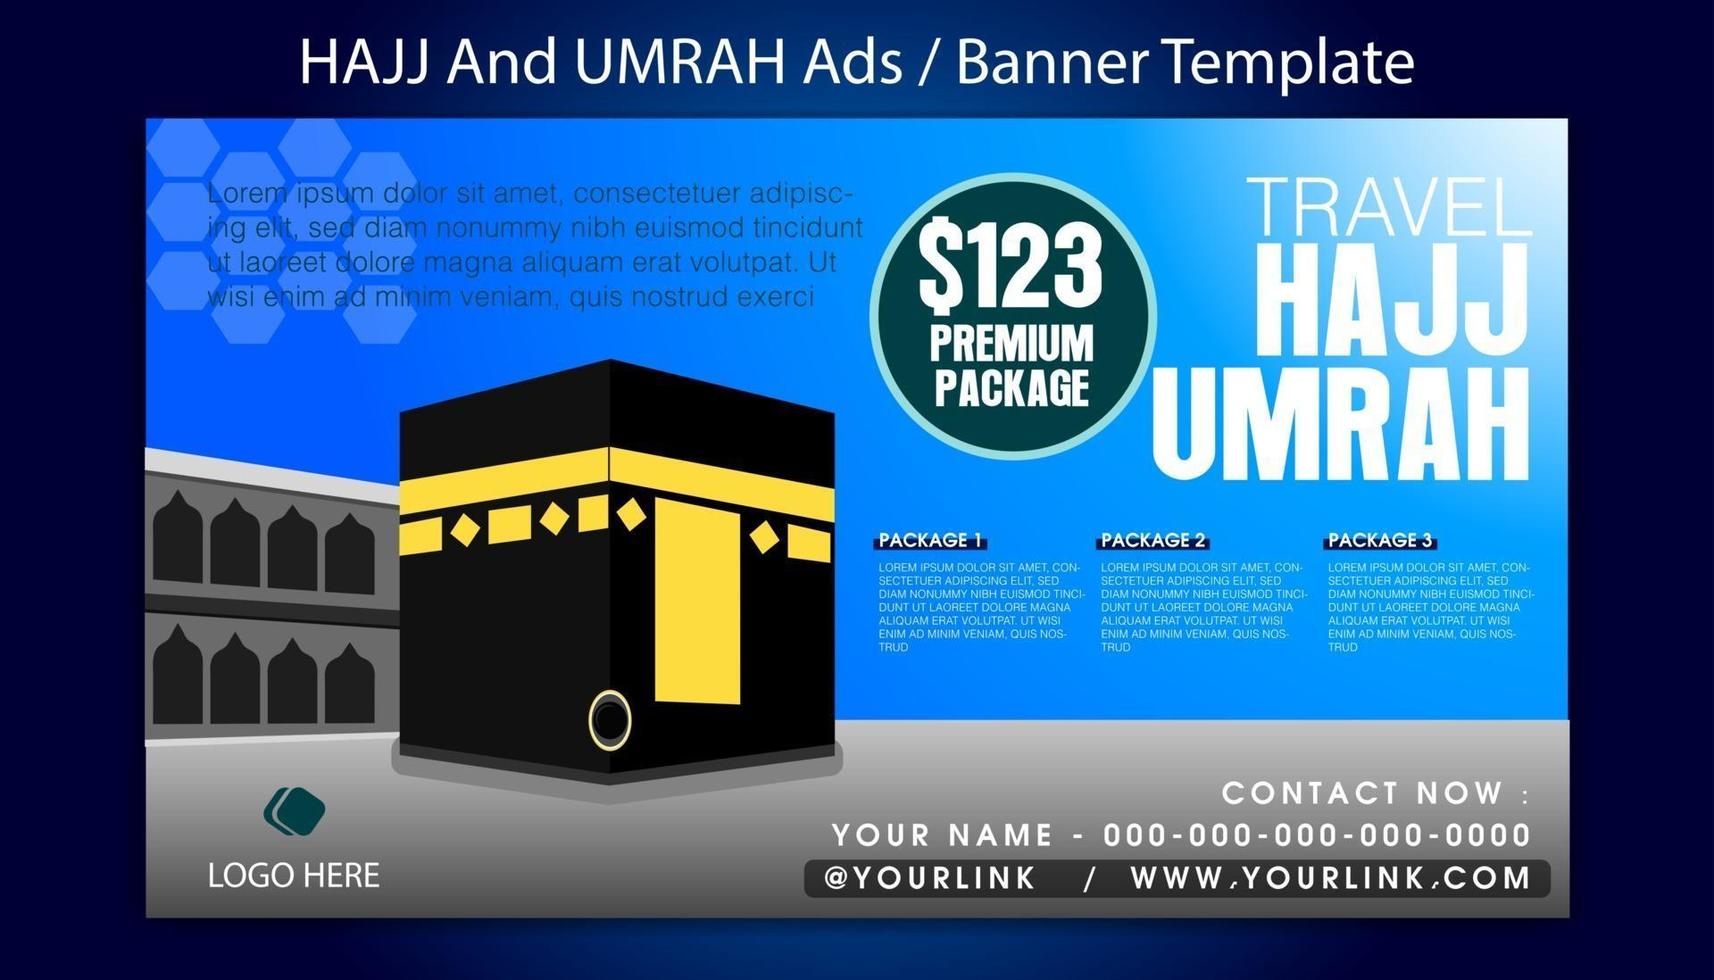 Hajj and Umrah banner template with sky blue background vector